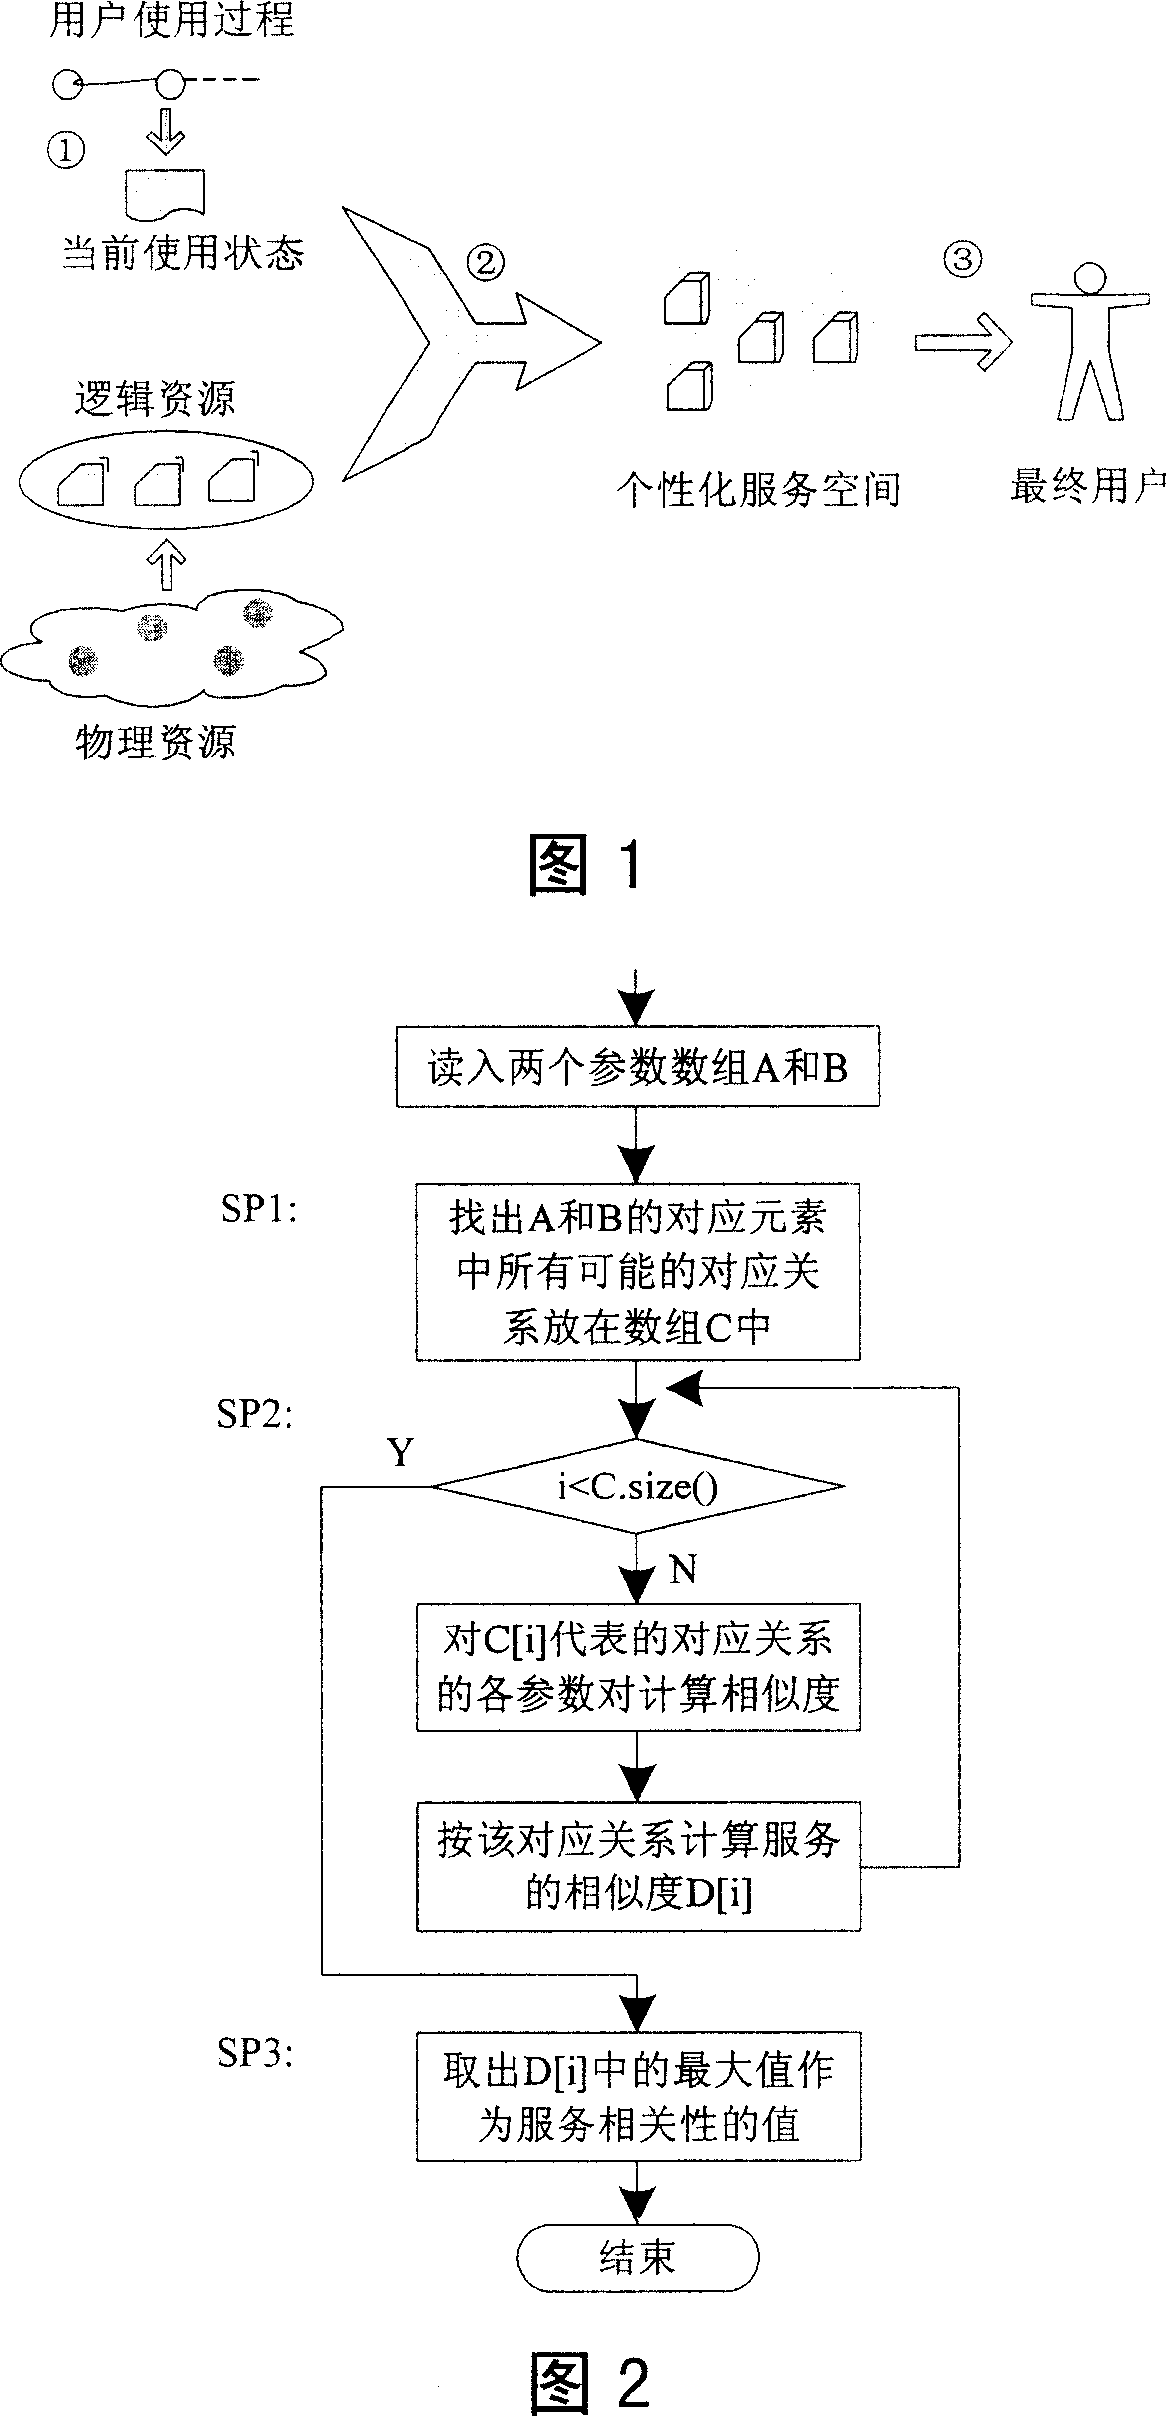 Method for providing personalized service facing final user